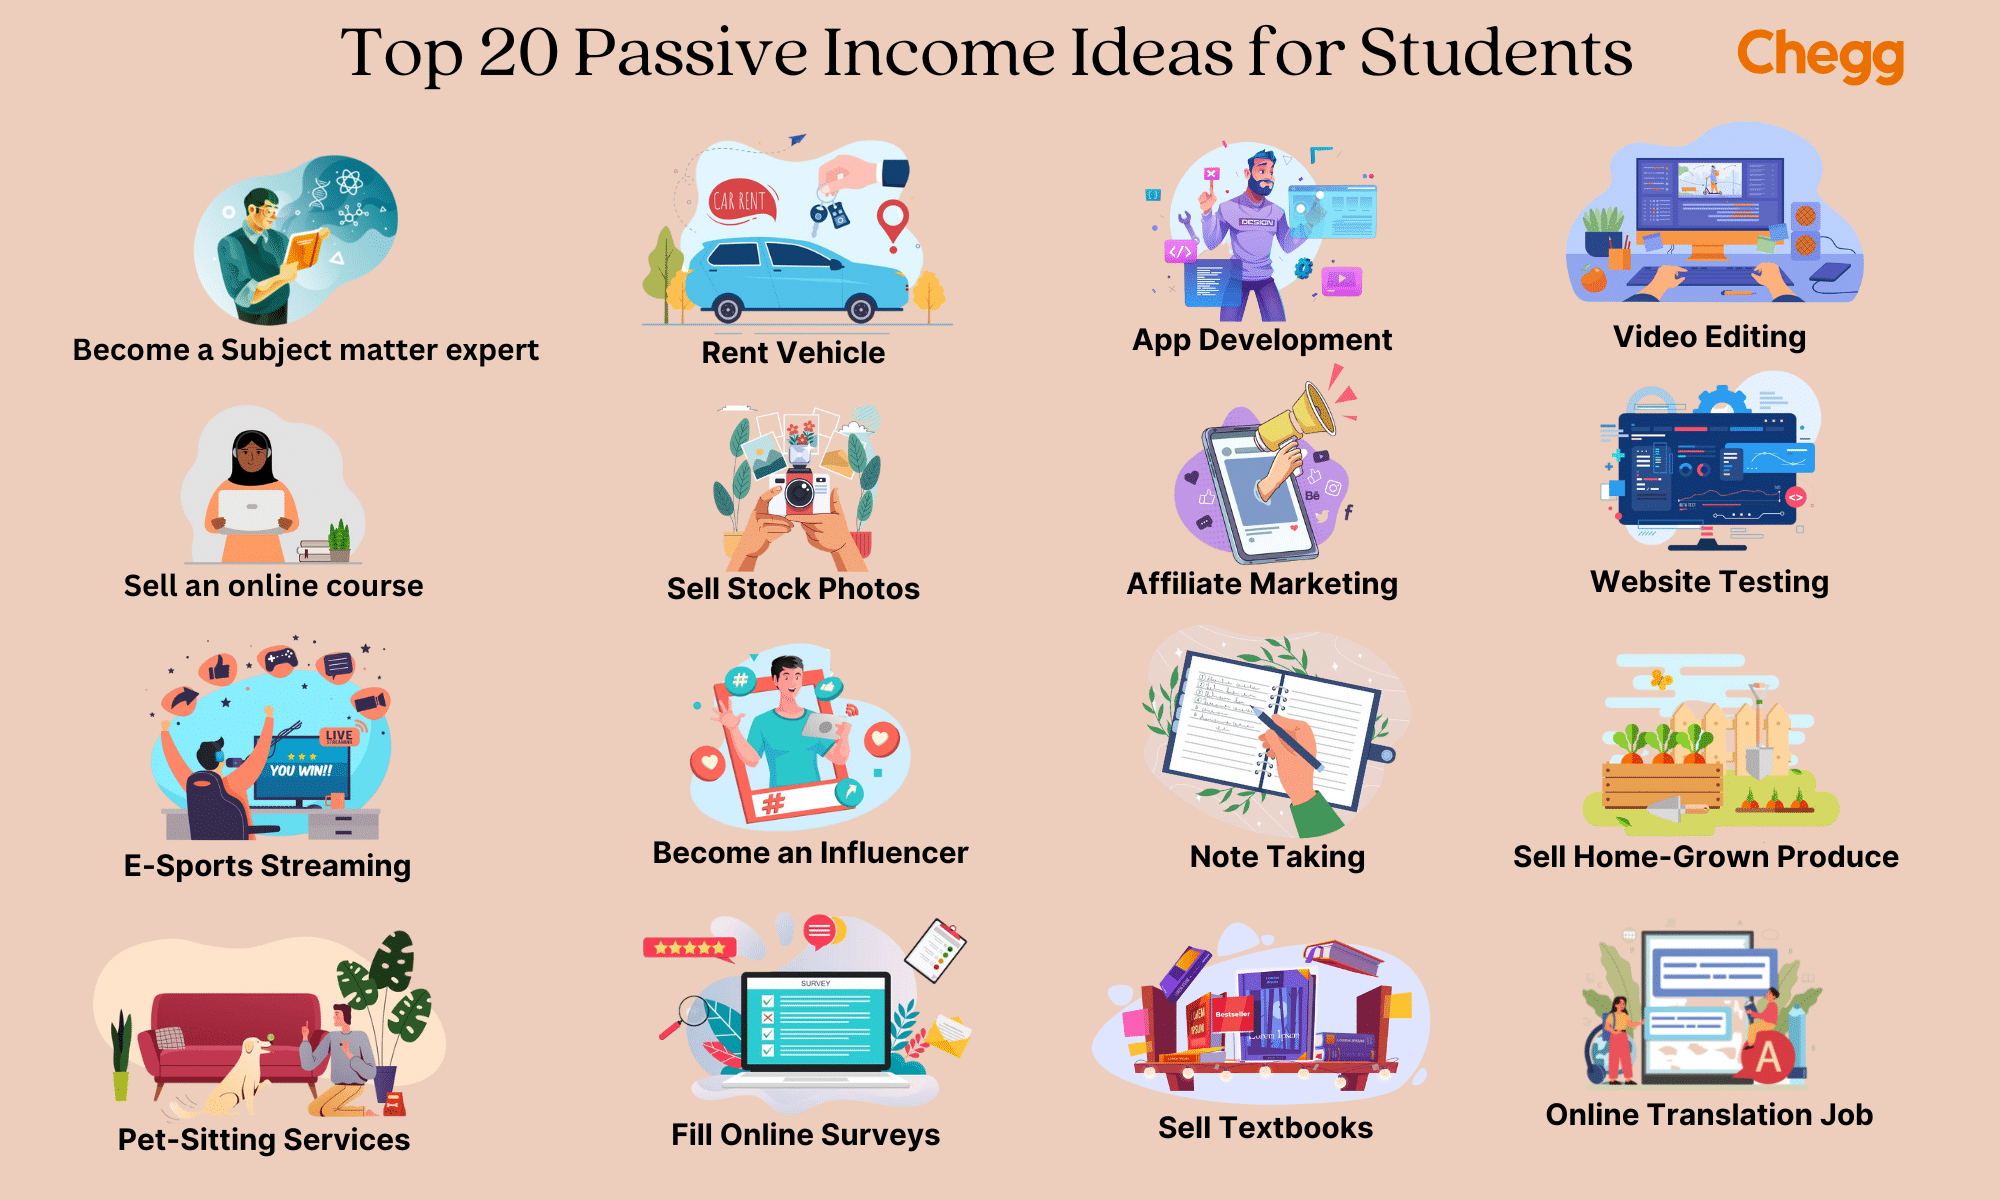 21 Passive Ideas for Students Earn Money While Studying